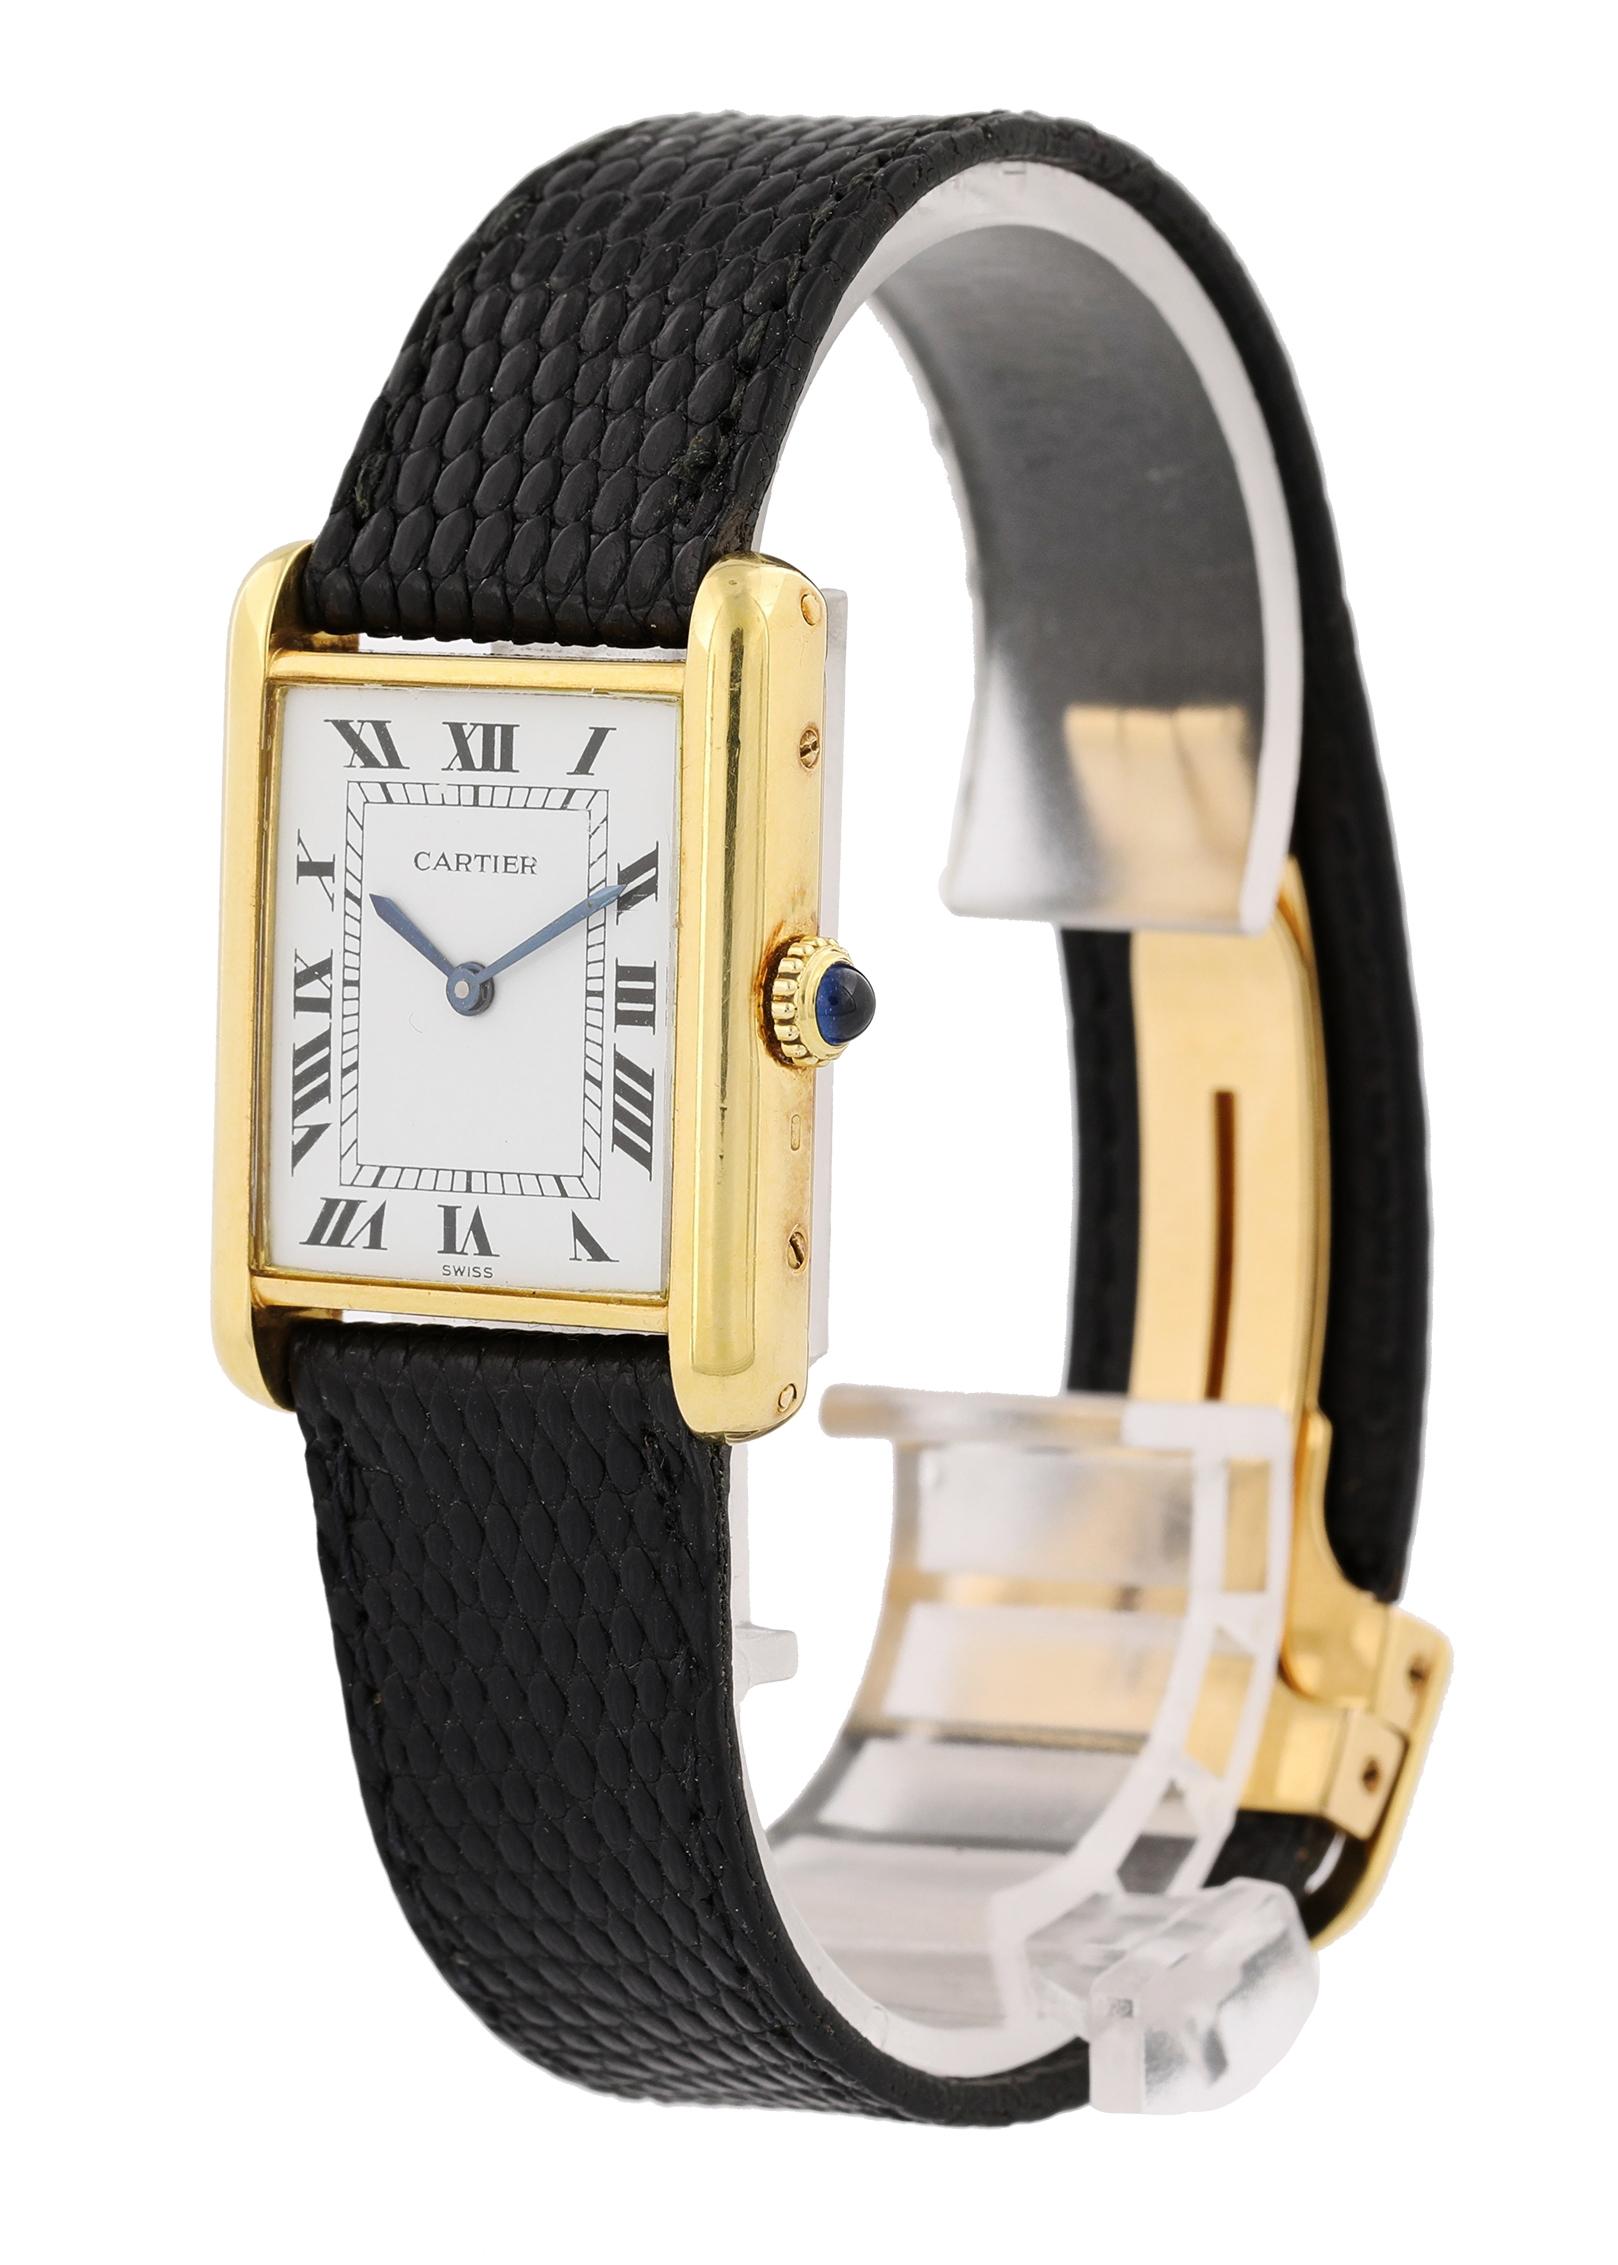 Cartier Tank Louis Ladies Watch. 
24mm 18k Yellow Gold case. 
Yellow Gold Stationary bezel. 
White dial with Blue steel hands and Roman numeral hour markers. 
Minute markers on the inner dial. 
Leather Lizard Strap with Fold Over Clasp.
Will fit up